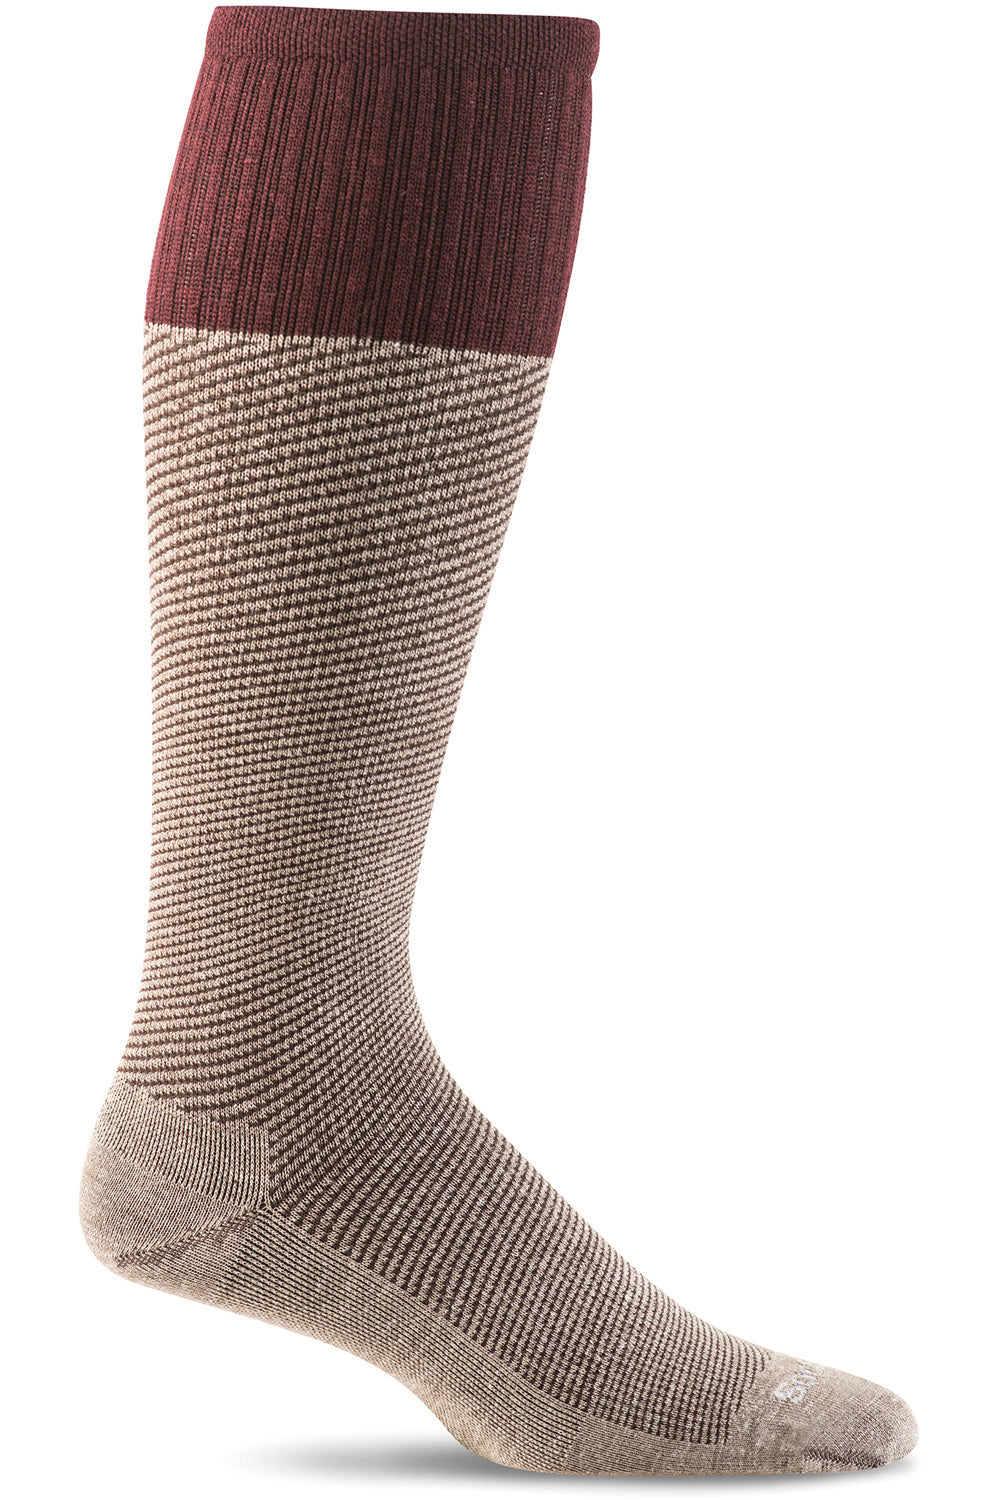 Sockwell Men's Bart Compression Sock in Khaki color from the side